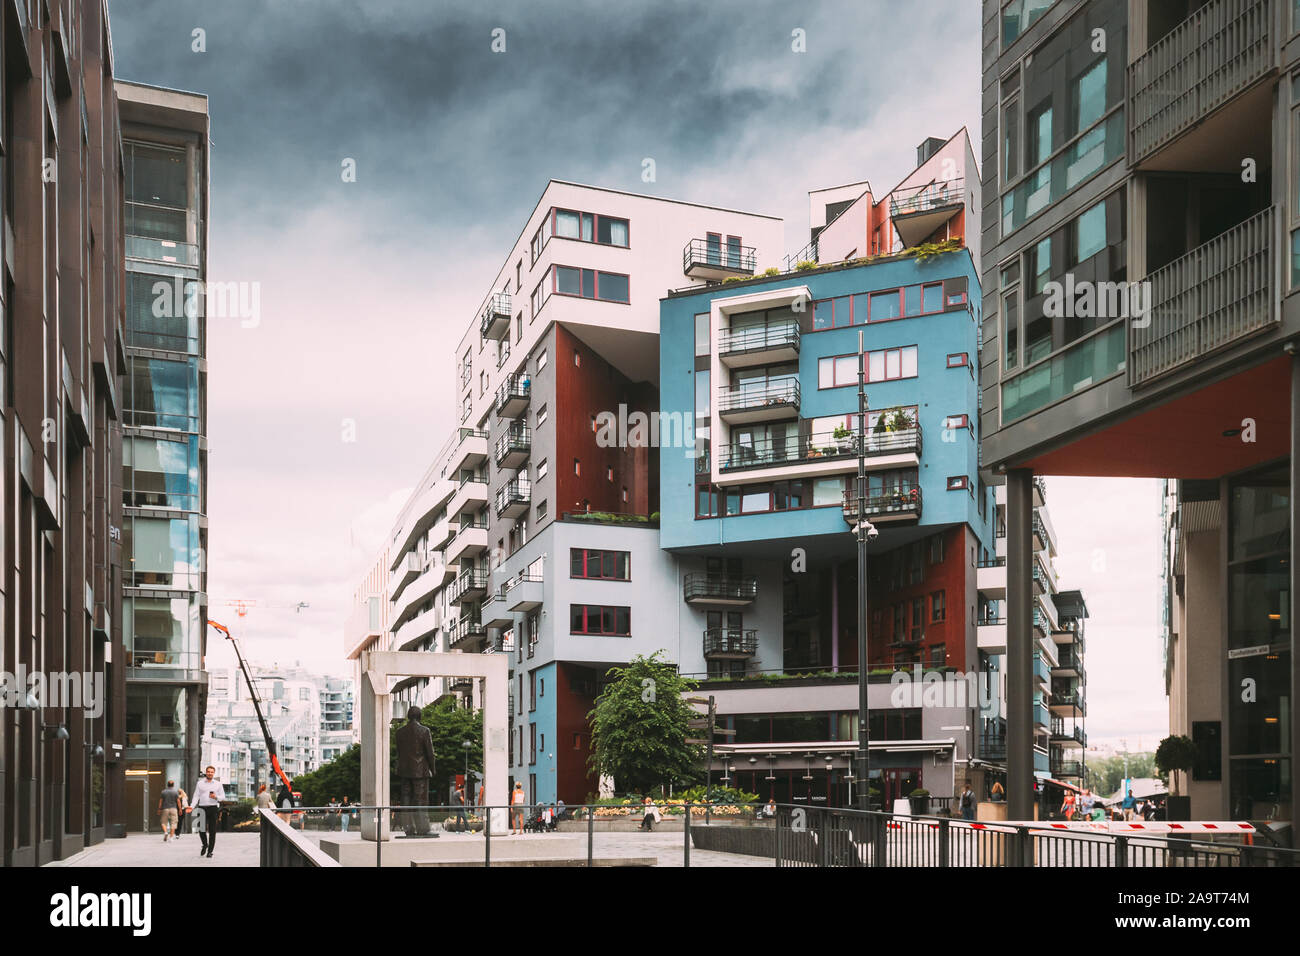 Oslo, Norway - June 24, 2019: People Walking Near Residential Multi-storey Houses In Aker Brygge District In Summer Evening. Famous And Popular Place. Stock Photo